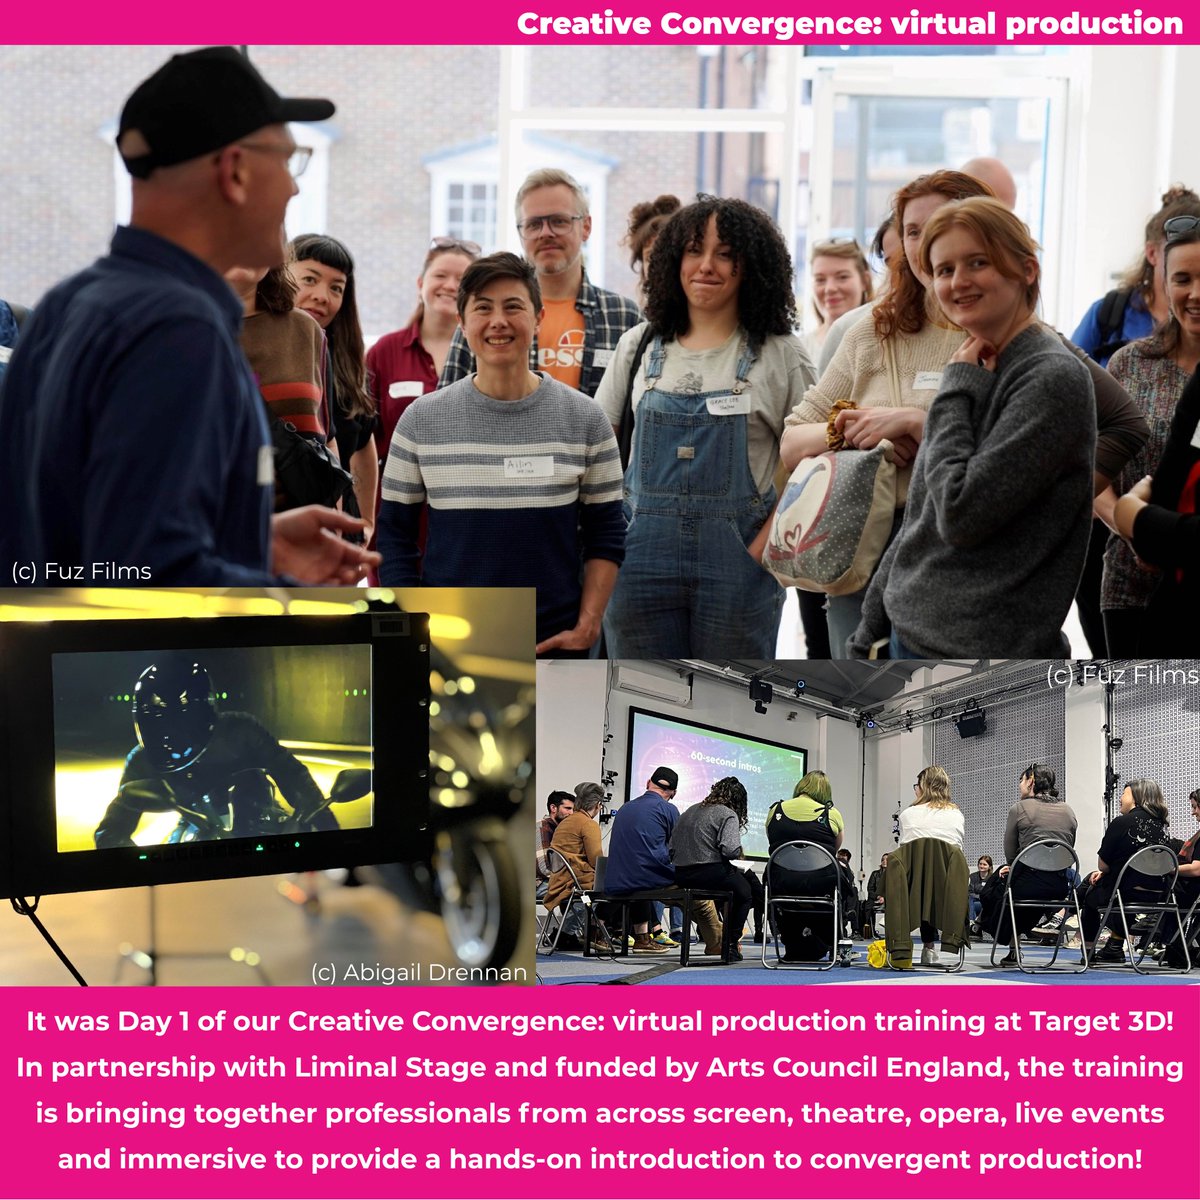 It was Day 1 of our #CreativeConvergence: #virtualproduction training with @Liminal_Stage, funded by @ace_national! The training @Target_3d is introducing convergent process and production to professionals from across the screen, theatre, opera, live events and immersive sectors.